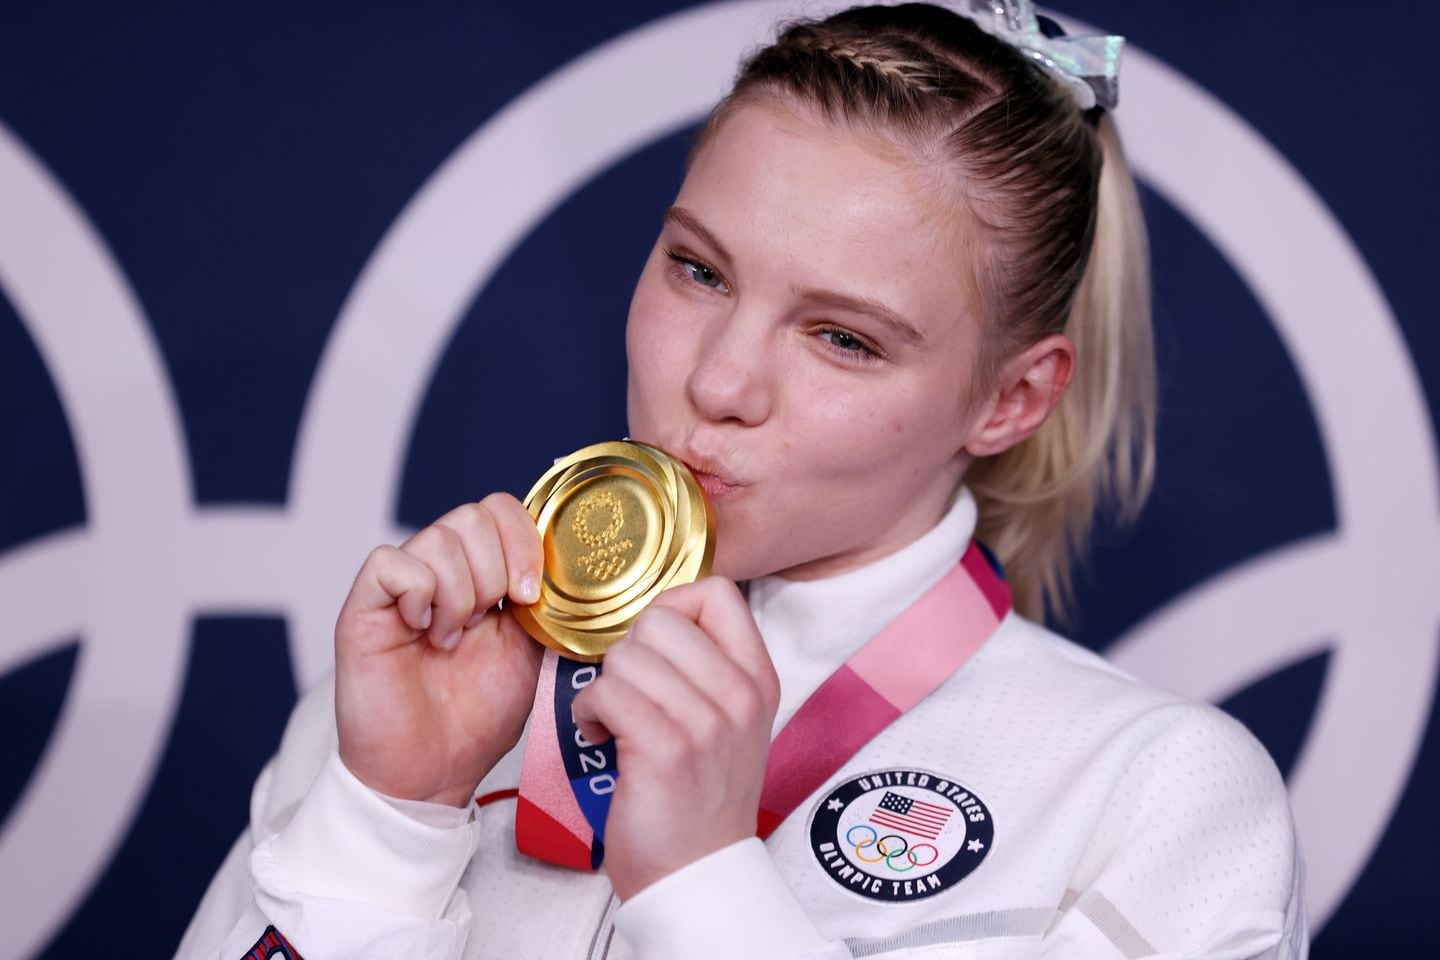 Jade Carey called her performance “the best floor routine I’ve ever done in my life.”